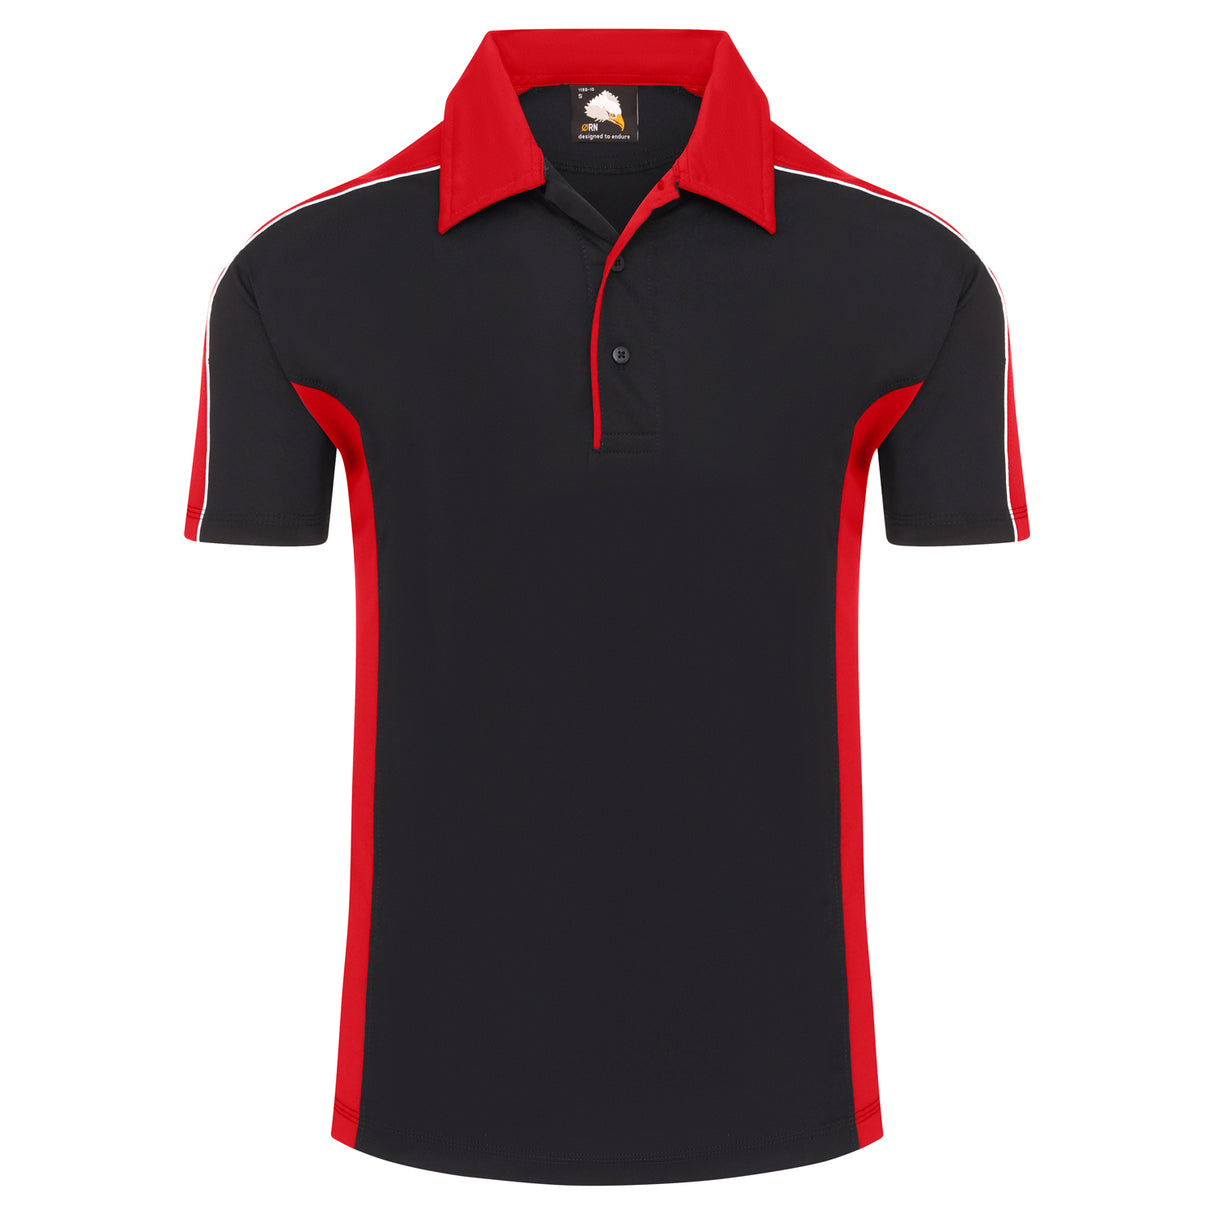 orn_avocet_two_tone_polyester_poloshirt_navy_-_red